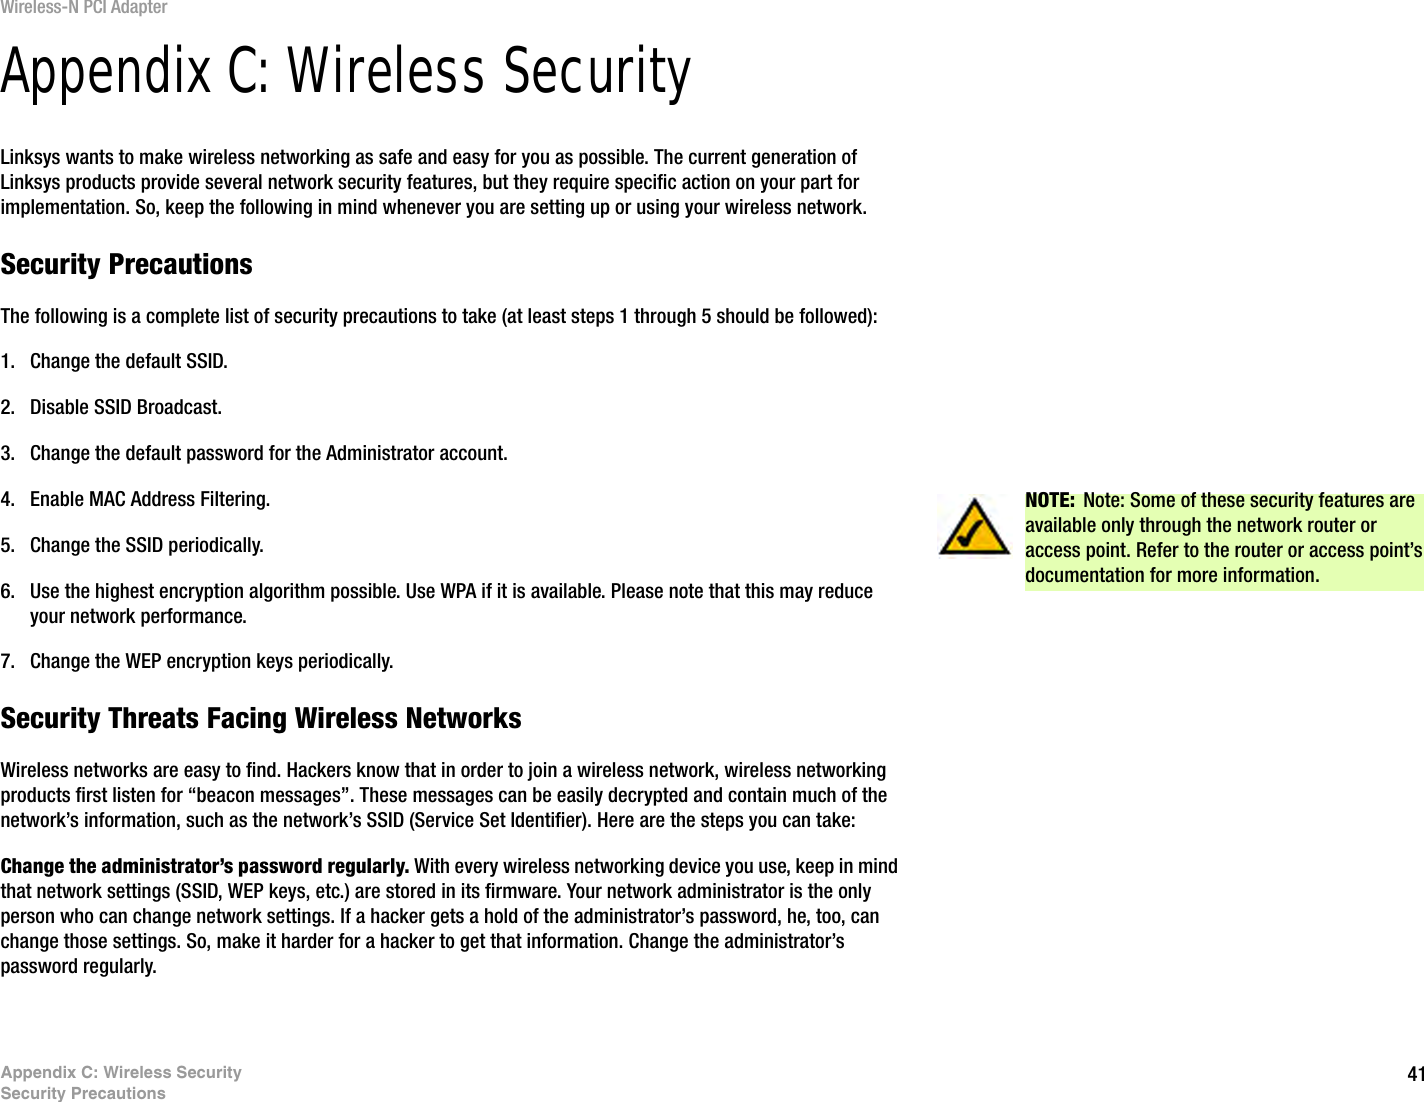 41Appendix C: Wireless SecuritySecurity PrecautionsWireless-N PCI AdapterAppendix C: Wireless SecurityLinksys wants to make wireless networking as safe and easy for you as possible. The current generation of Linksys products provide several network security features, but they require specific action on your part for implementation. So, keep the following in mind whenever you are setting up or using your wireless network.Security PrecautionsThe following is a complete list of security precautions to take (at least steps 1 through 5 should be followed):1. Change the default SSID. 2. Disable SSID Broadcast. 3. Change the default password for the Administrator account. 4. Enable MAC Address Filtering. 5. Change the SSID periodically. 6. Use the highest encryption algorithm possible. Use WPA if it is available. Please note that this may reduce your network performance. 7. Change the WEP encryption keys periodically. Security Threats Facing Wireless Networks Wireless networks are easy to find. Hackers know that in order to join a wireless network, wireless networking products first listen for “beacon messages”. These messages can be easily decrypted and contain much of the network’s information, such as the network’s SSID (Service Set Identifier). Here are the steps you can take:Change the administrator’s password regularly. With every wireless networking device you use, keep in mind that network settings (SSID, WEP keys, etc.) are stored in its firmware. Your network administrator is the only person who can change network settings. If a hacker gets a hold of the administrator’s password, he, too, can change those settings. So, make it harder for a hacker to get that information. Change the administrator’s password regularly.NOTE: Note: Some of these security features are available only through the network router or access point. Refer to the router or access point’s documentation for more information.